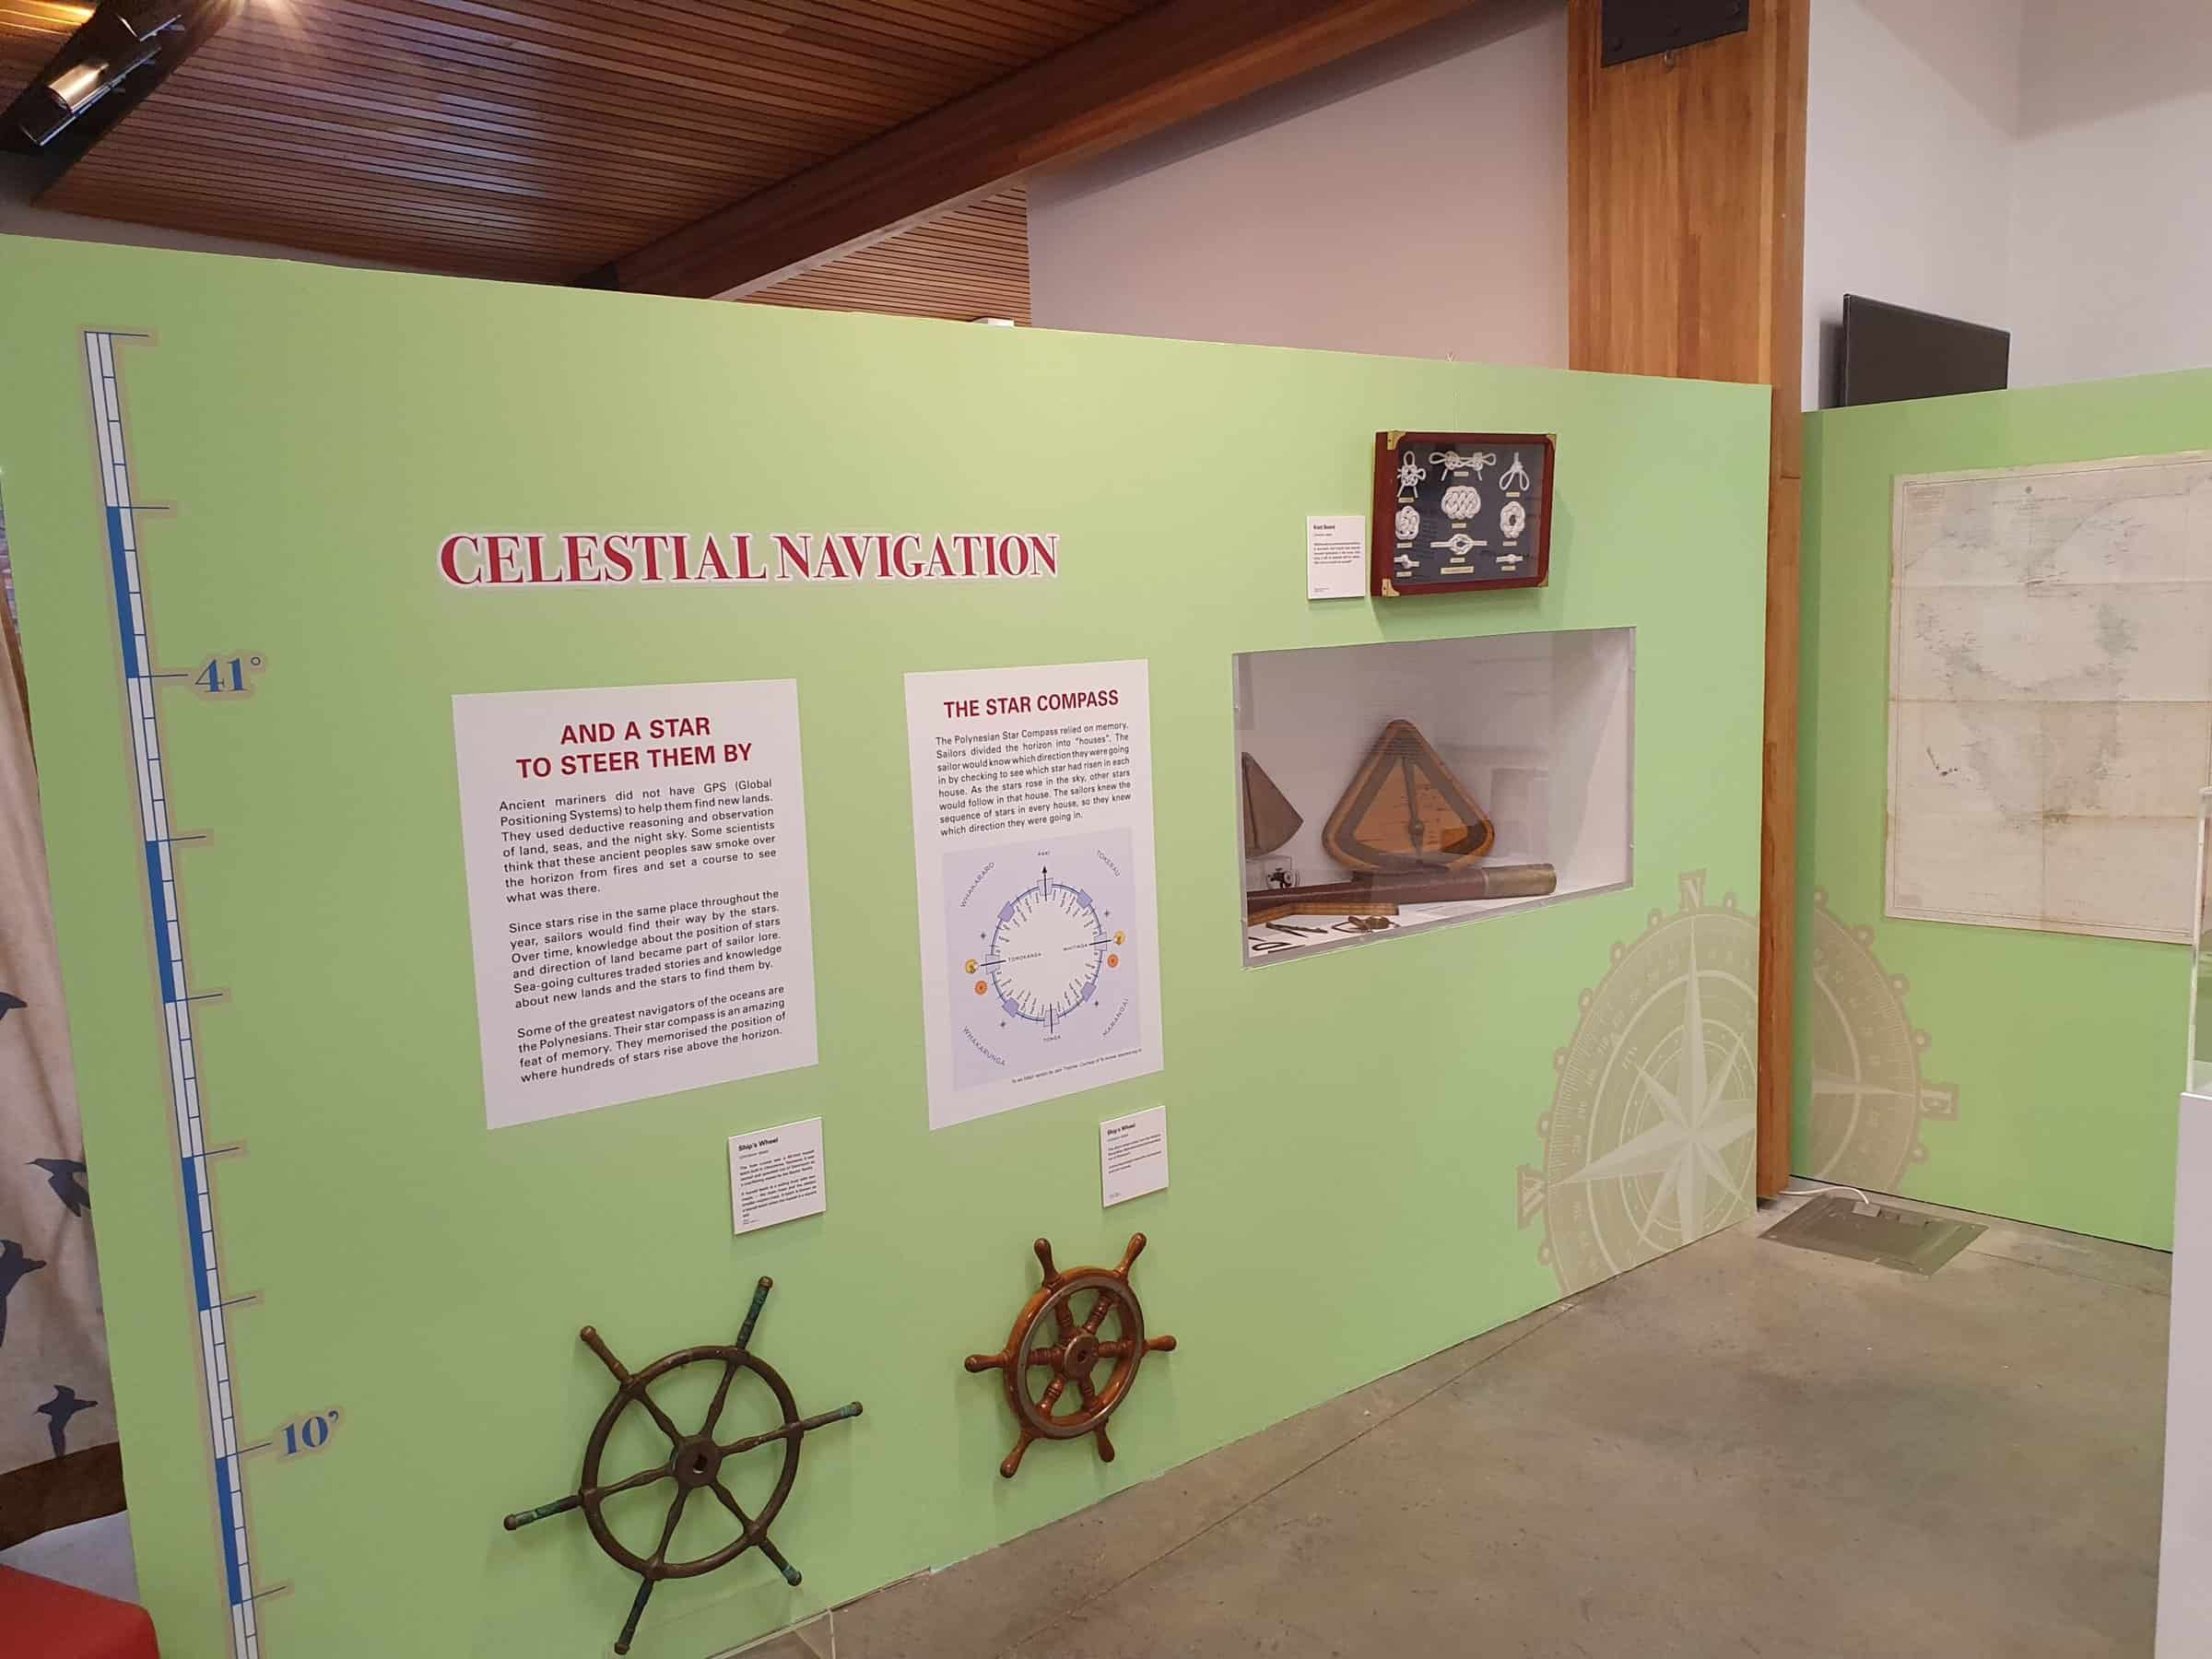 Image of a wall in the exhibition. Wall is light green with interpretive text and objects.